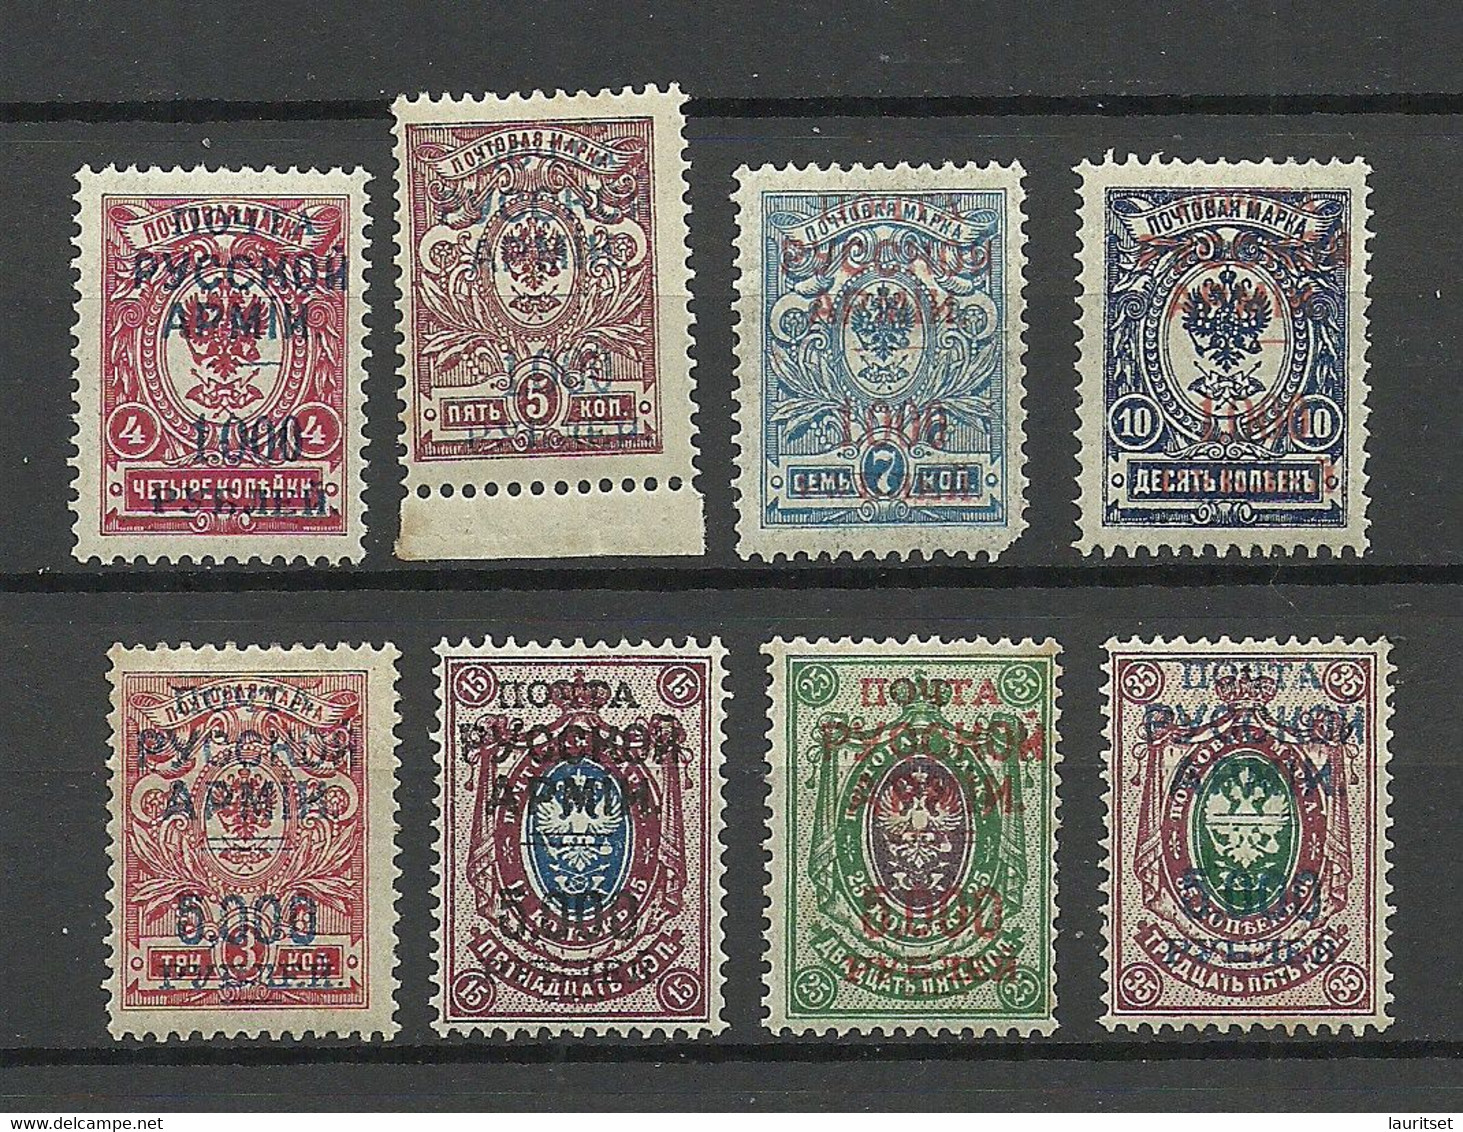 RUSSLAND RUSSIA 1920 Civil War Wrangel Army Camp Post At Gallipoli OPT, 8 Stamps * Some Are Signed - Armada Wrangel